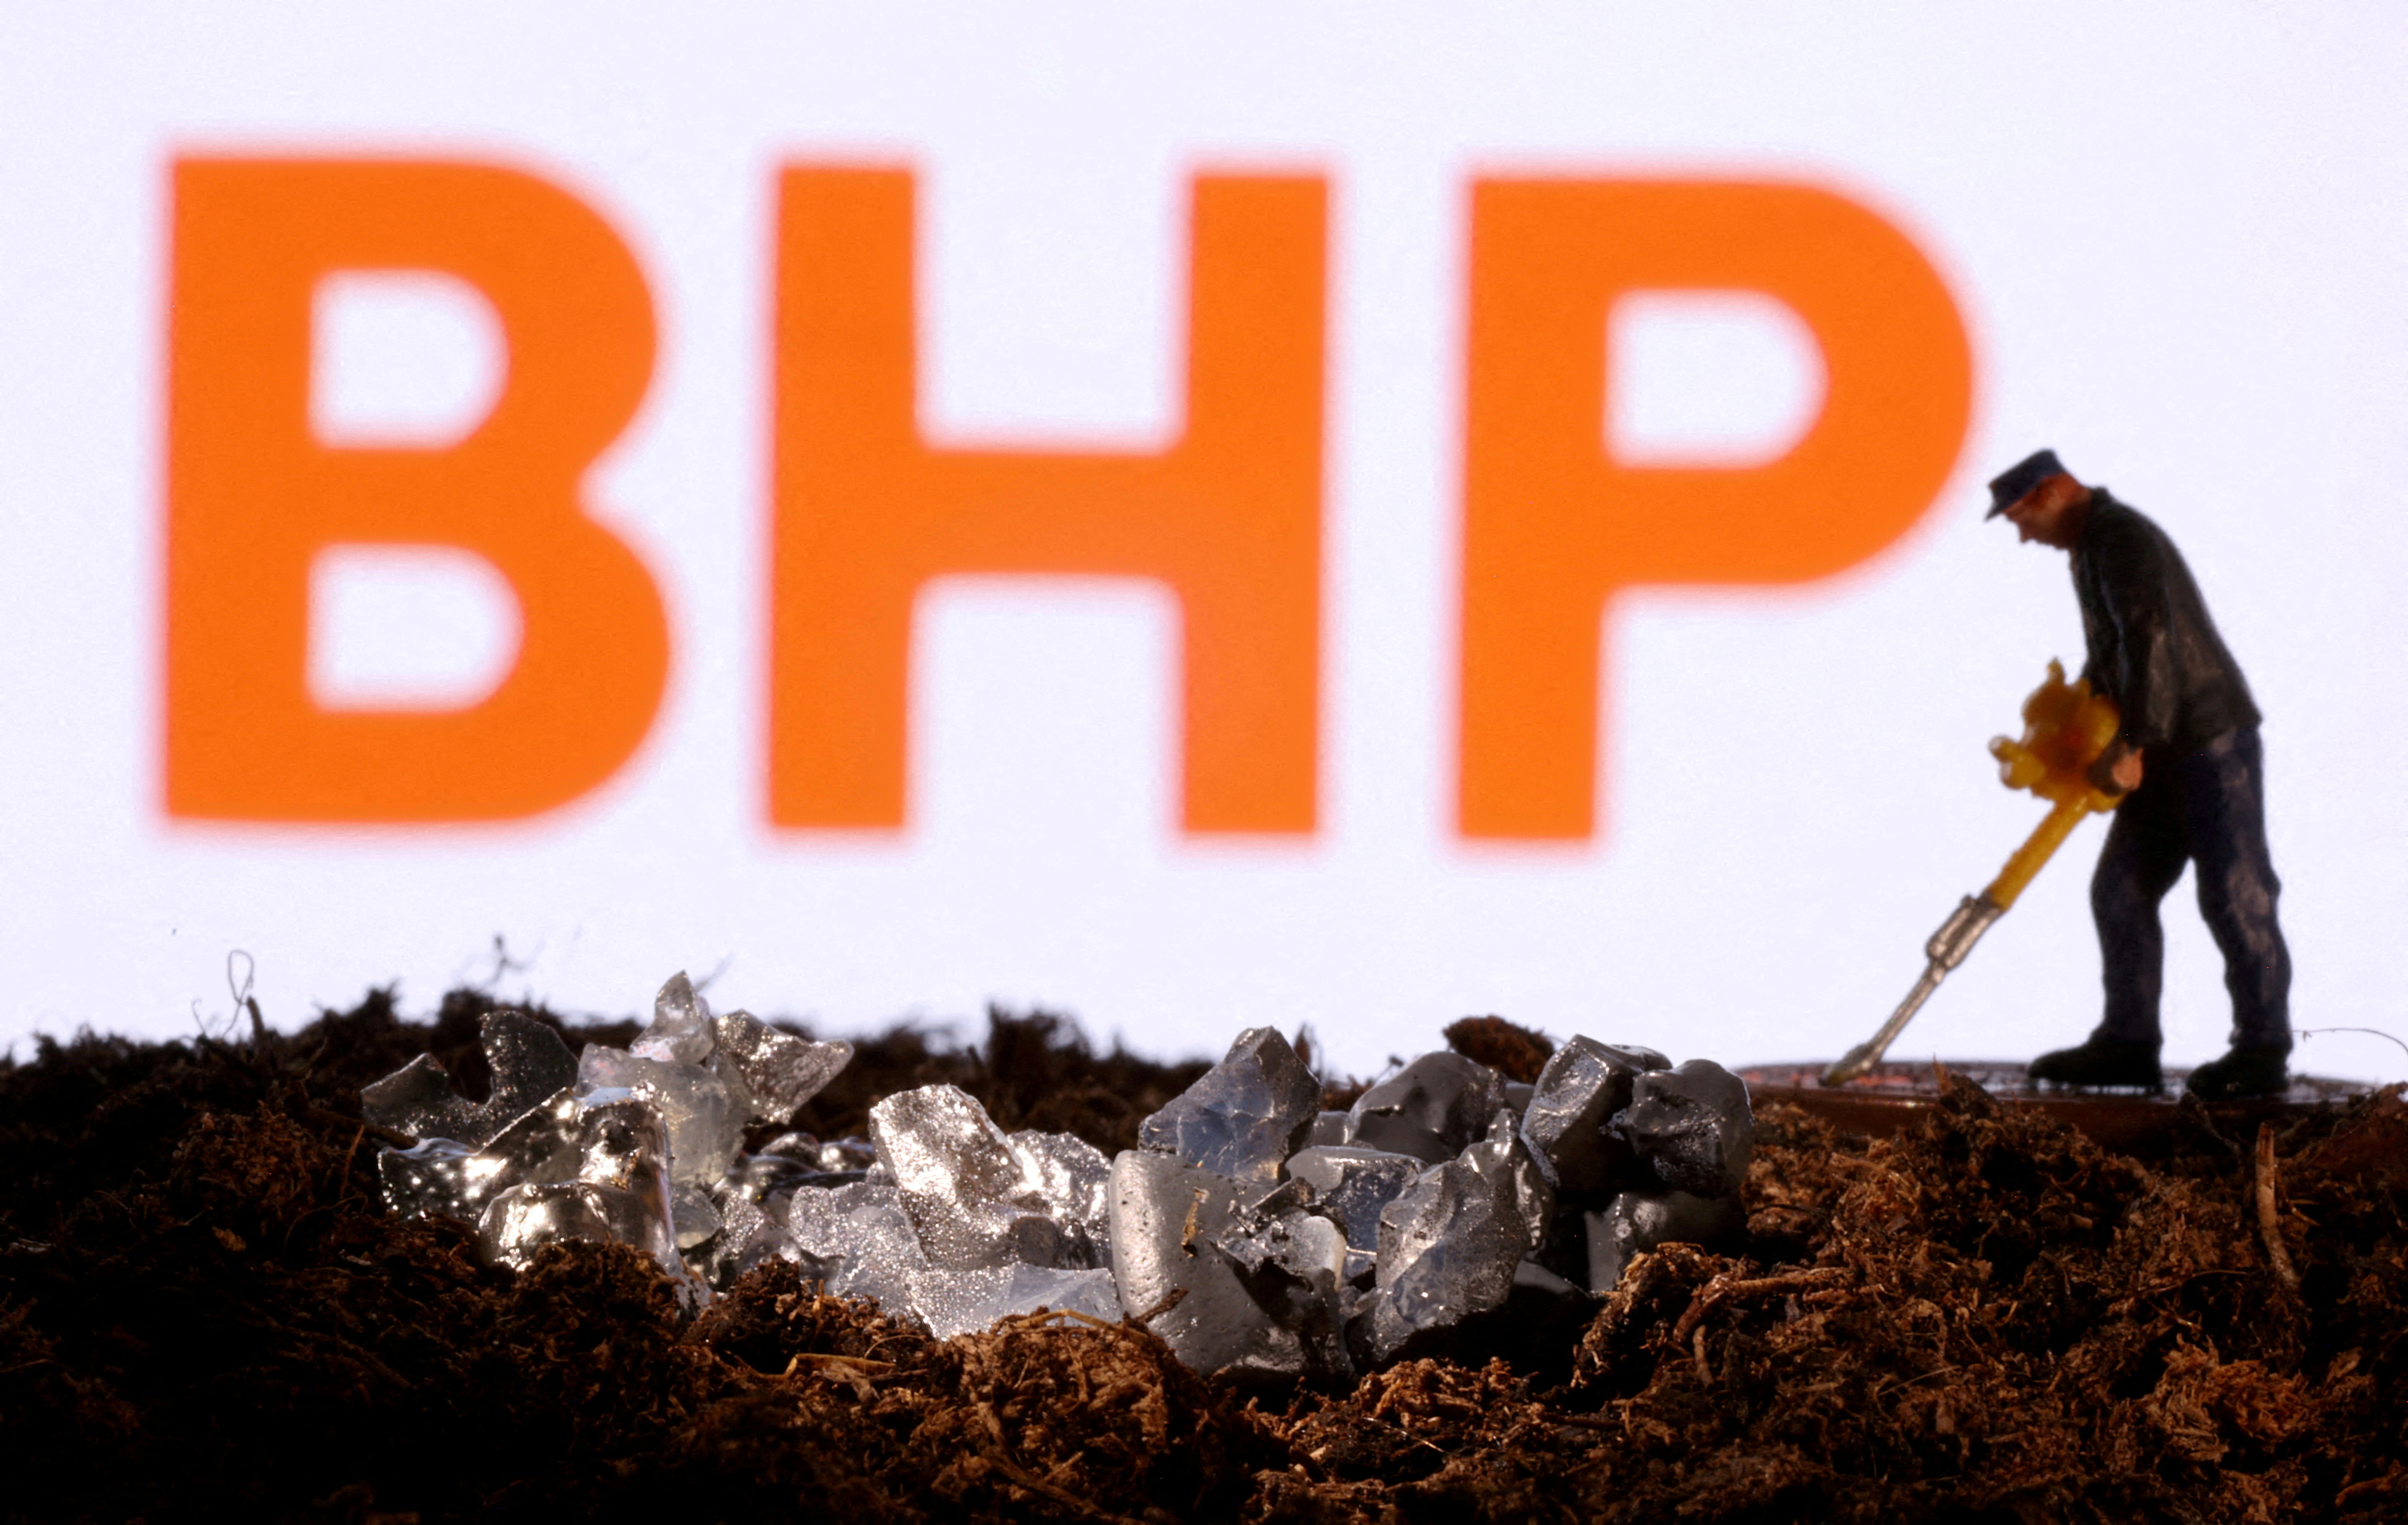 FILE PHOTO: Small toy figure and mineral imitation are seen in front of the BHP logo in this illustration